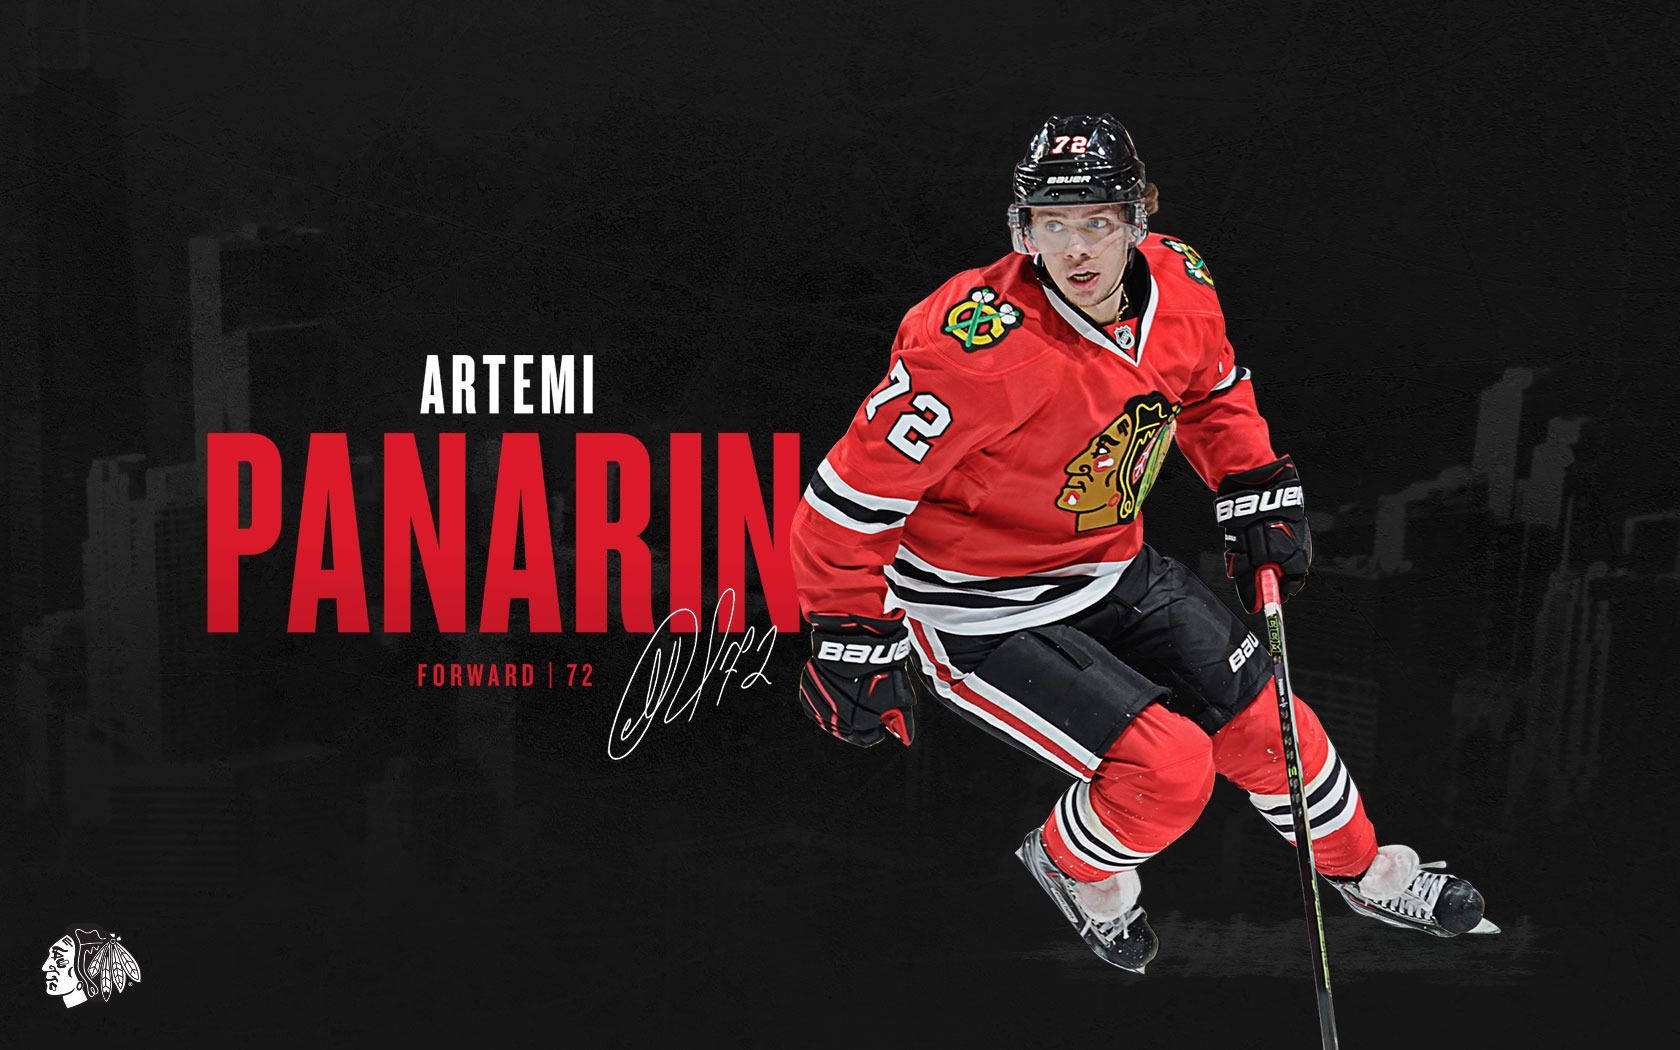 Artemi Panarin In Action - An Exciting Ice Hockey Game Wallpaper